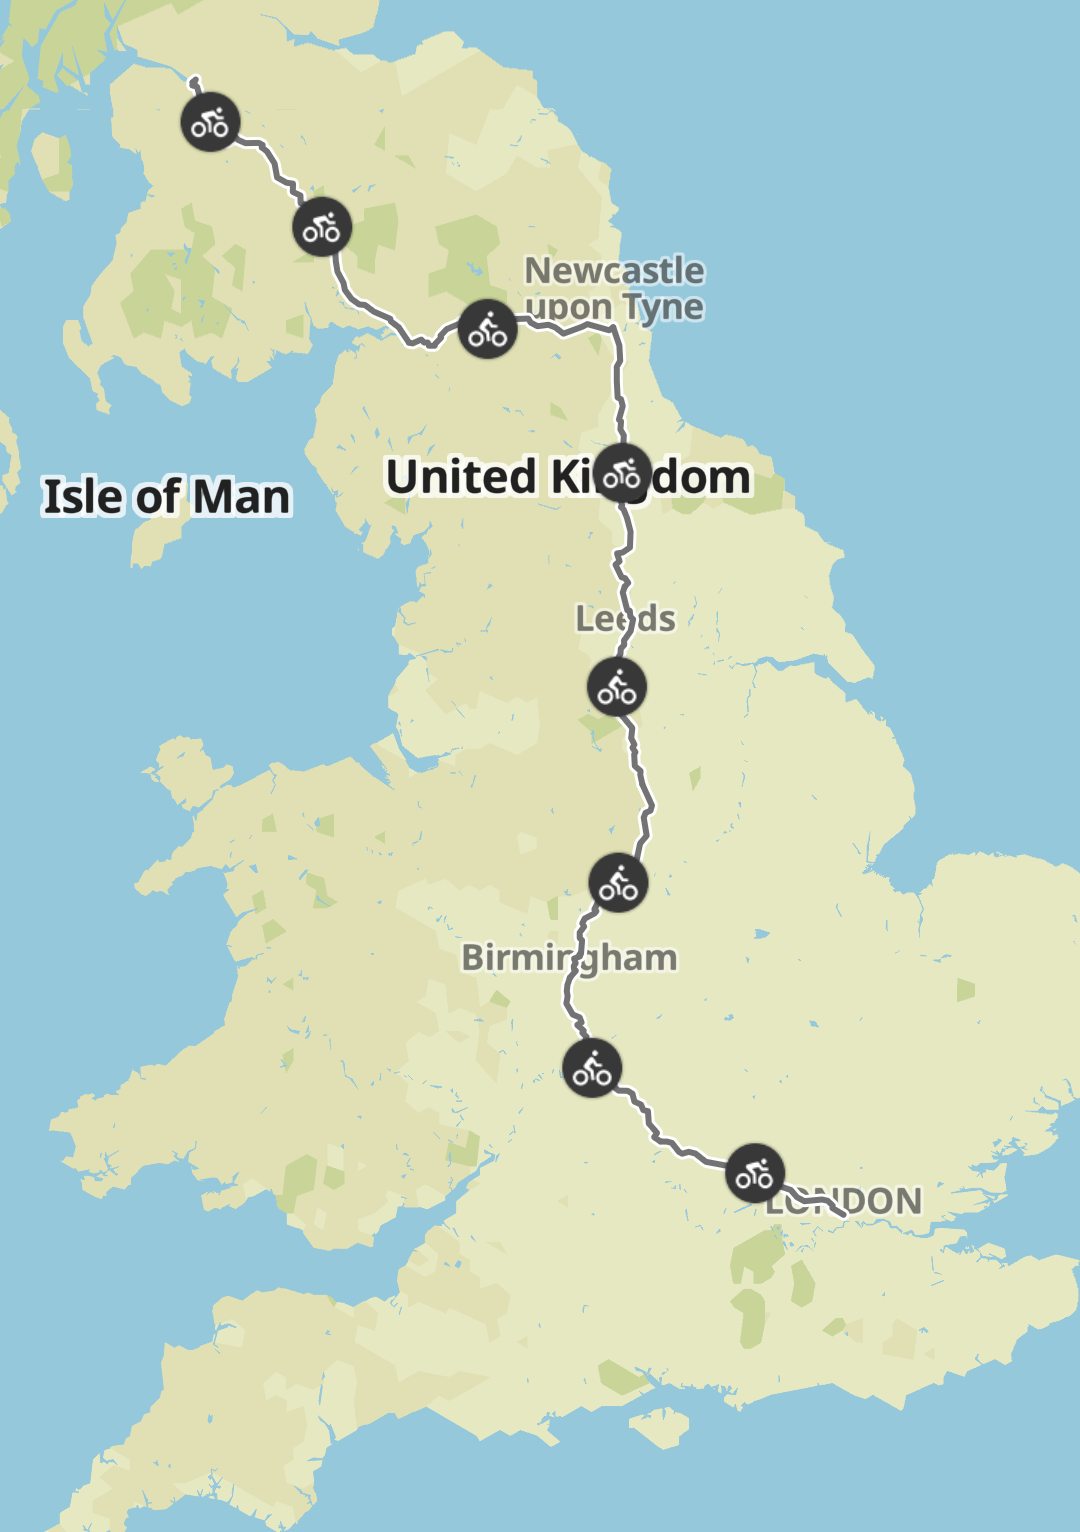 A map showing the cyclists' route so far